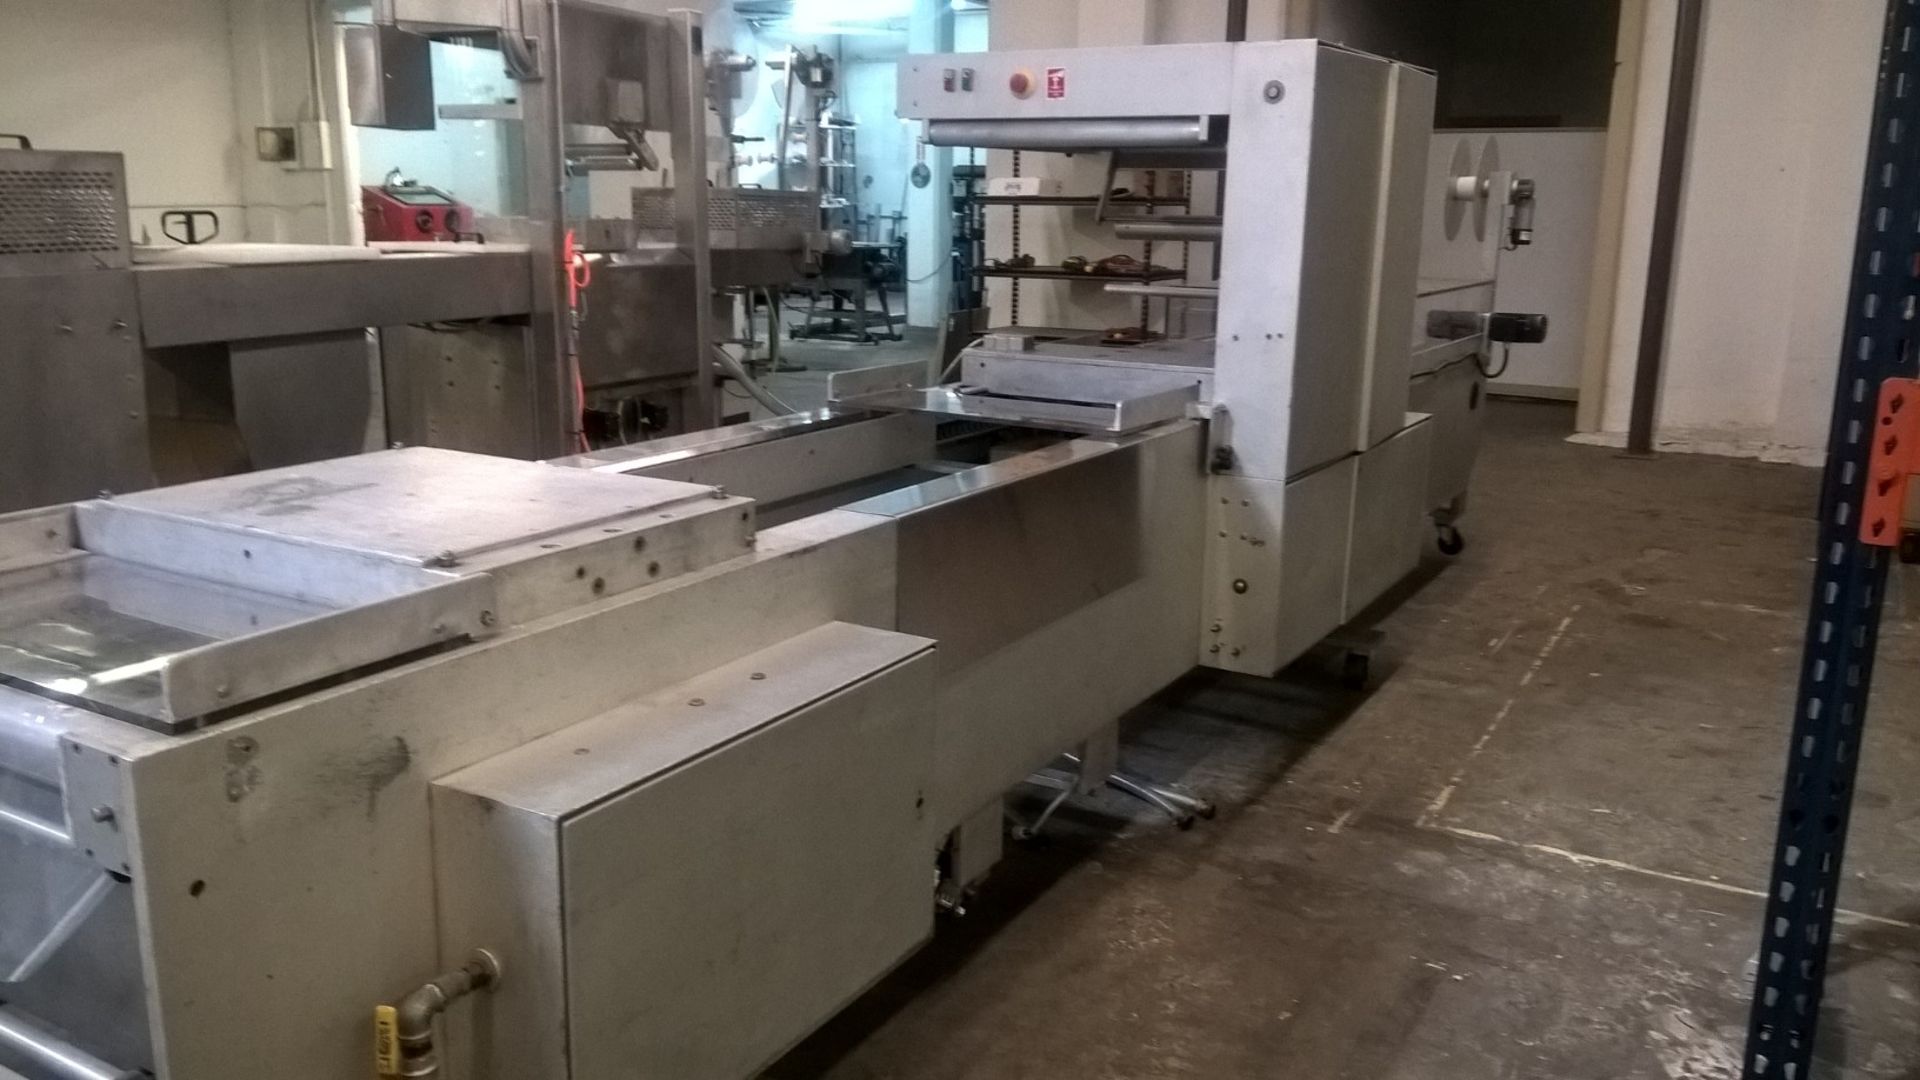 Multivac Thermoformer Vacuum Packager, Model R5100, Serial # 1054, Including 3 Pallets of Film ( - Image 6 of 7